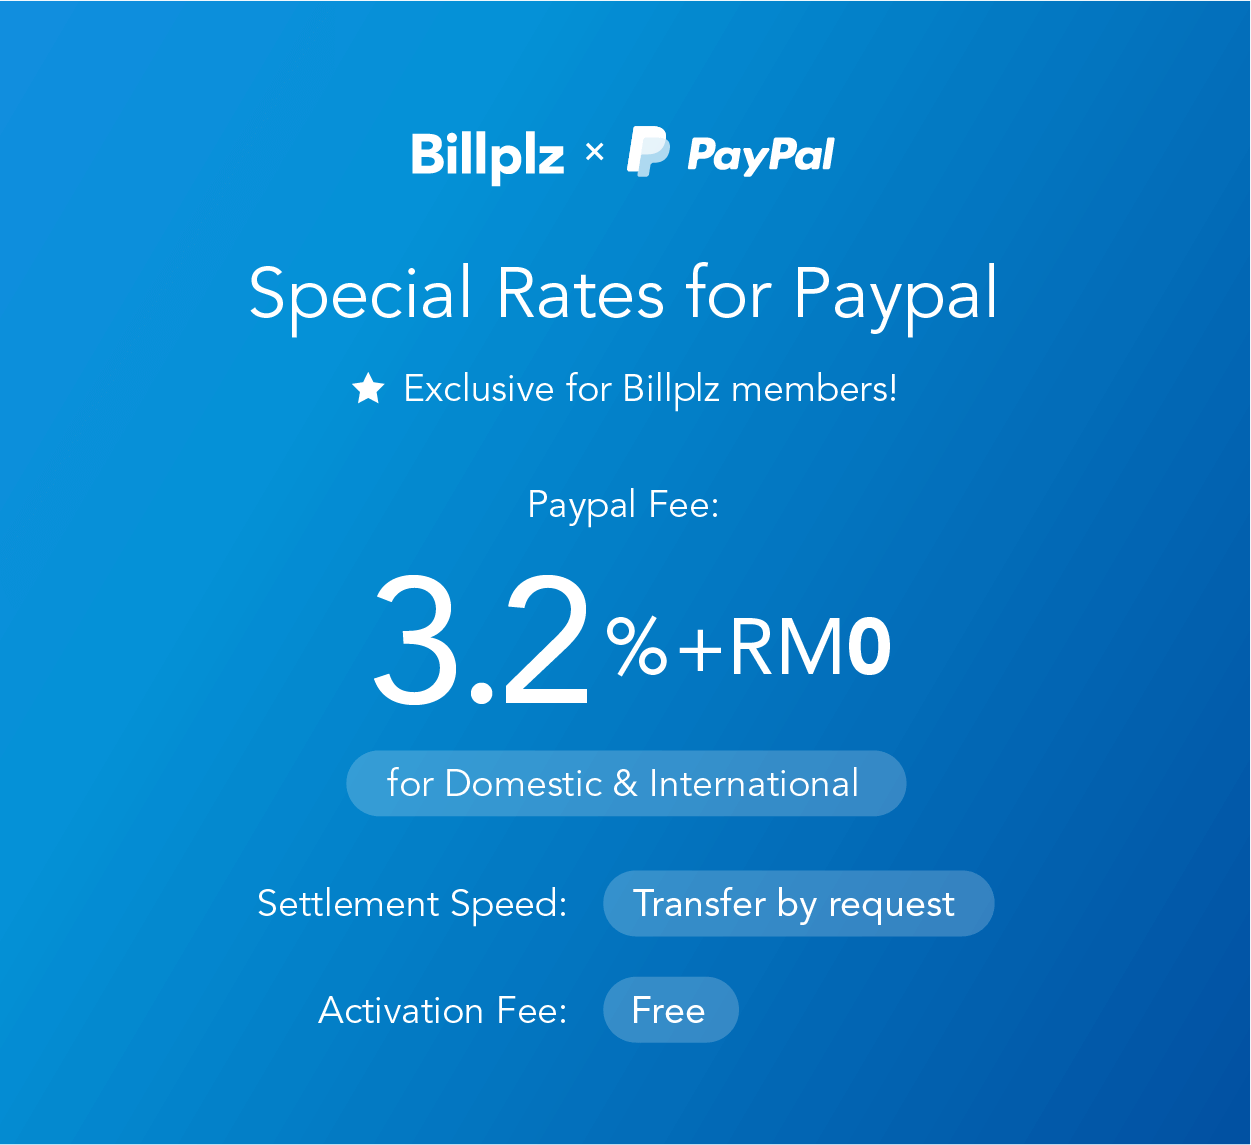 Paypal Special Rates